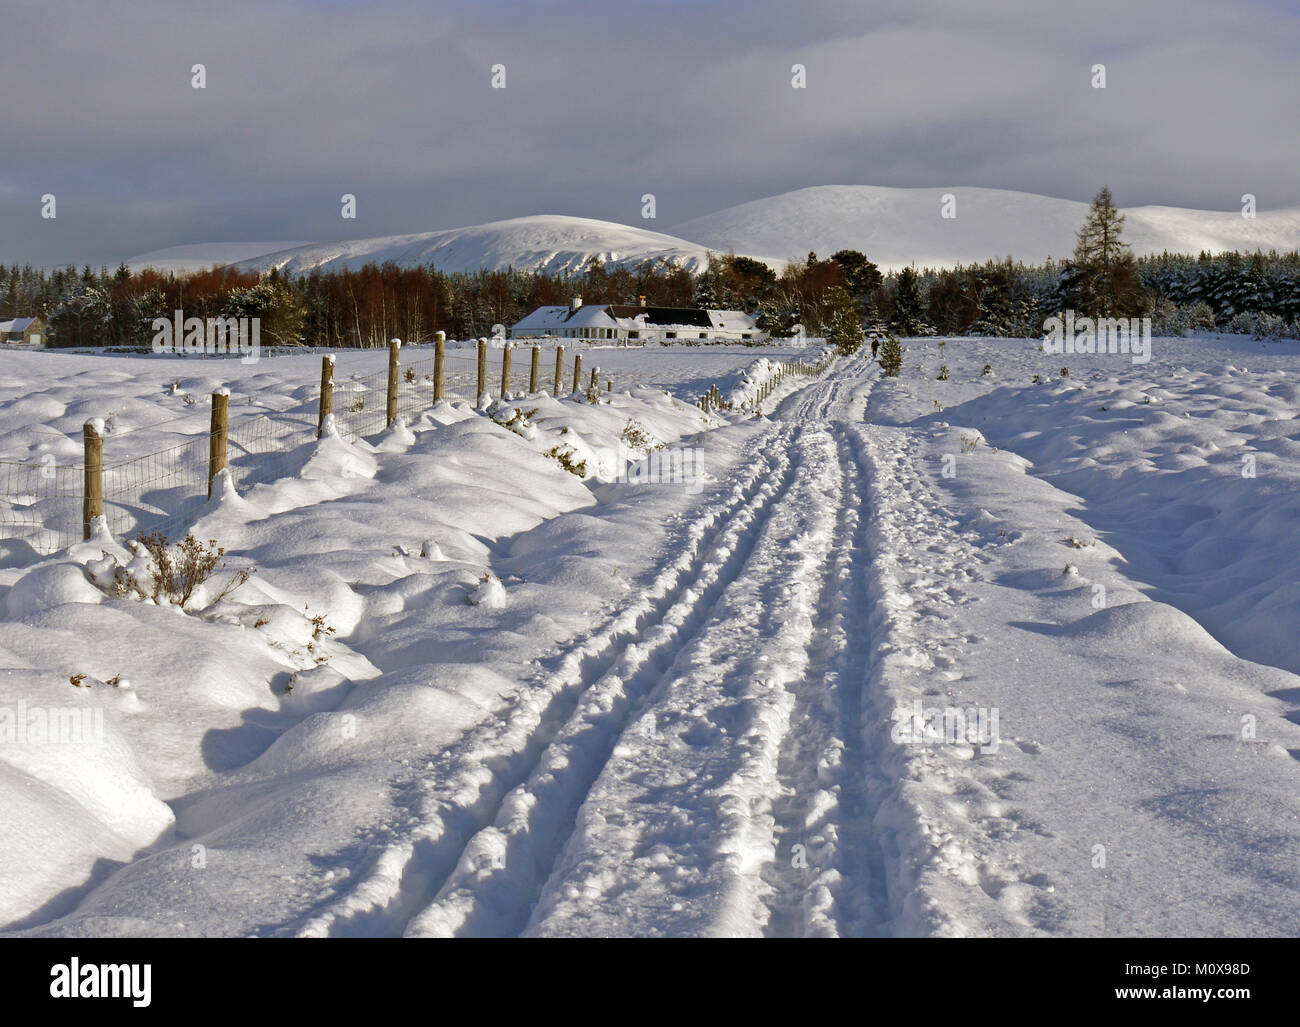 The Badenoch Way, a hiking trail from Aviemore to Insh Marshes in the highlands of Scotland, Inverness-shire.  The path as it enters Inveruglas. Stock Photo